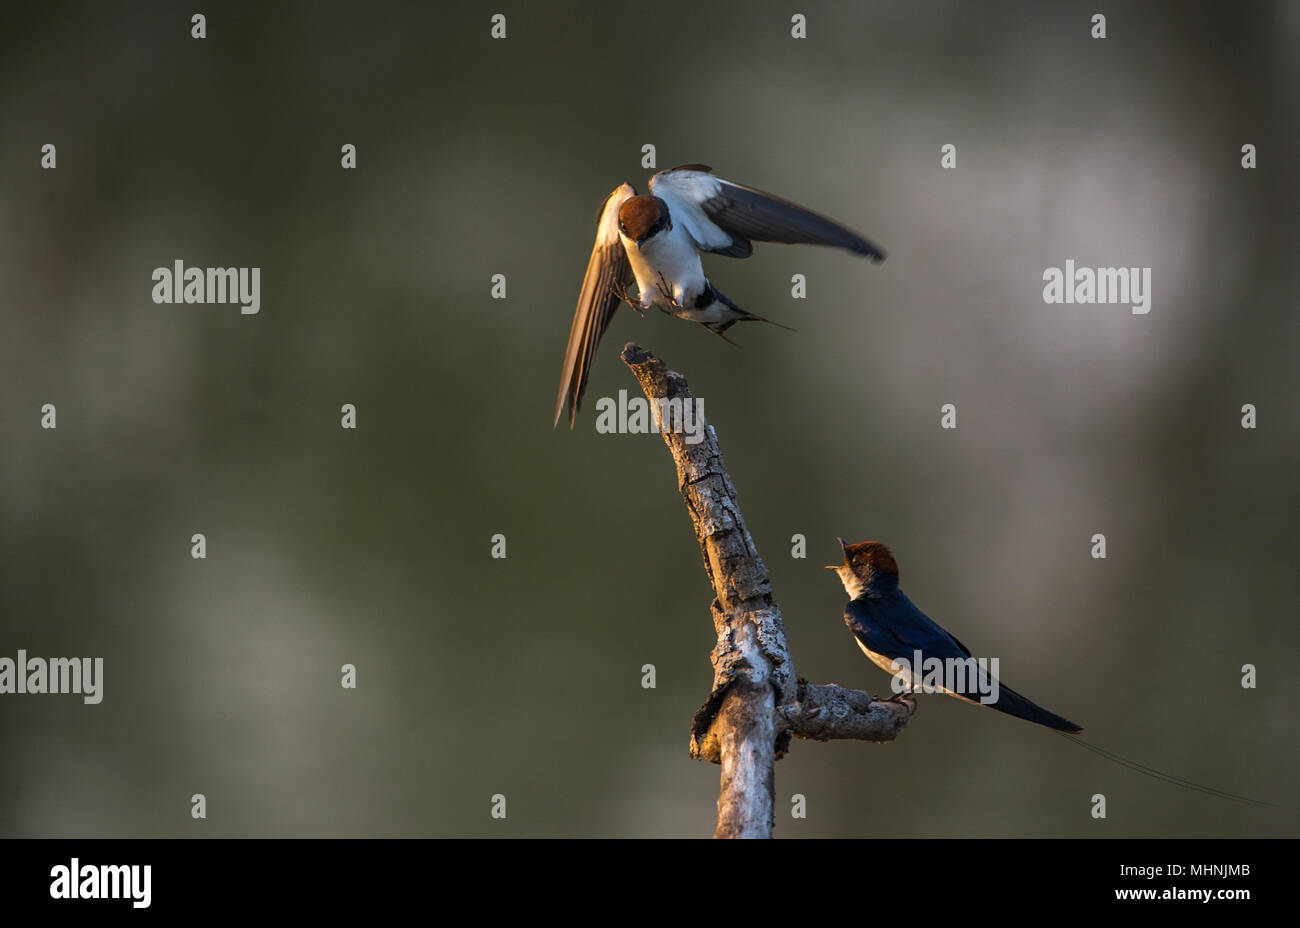 A swallow bird trying to scare off another one about to land Stock Photo